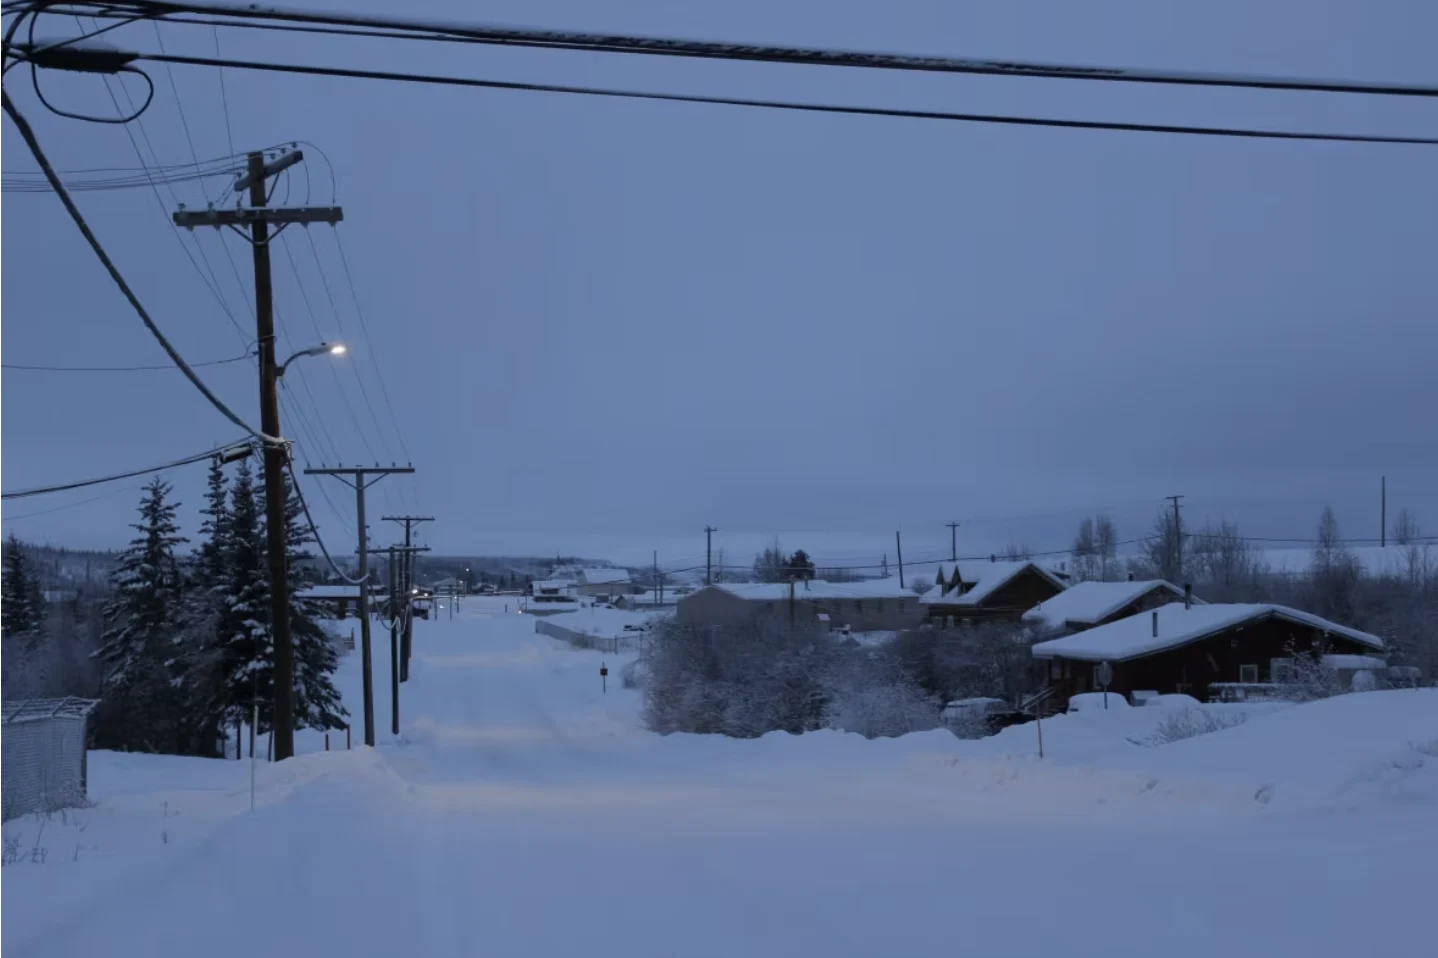 CBC: Distribution lines carry power from a diesel generating plant to homes in Fort Good Hope, N.W.T. on Jan. 10, 2023. (Liny Lamberink/CBC)